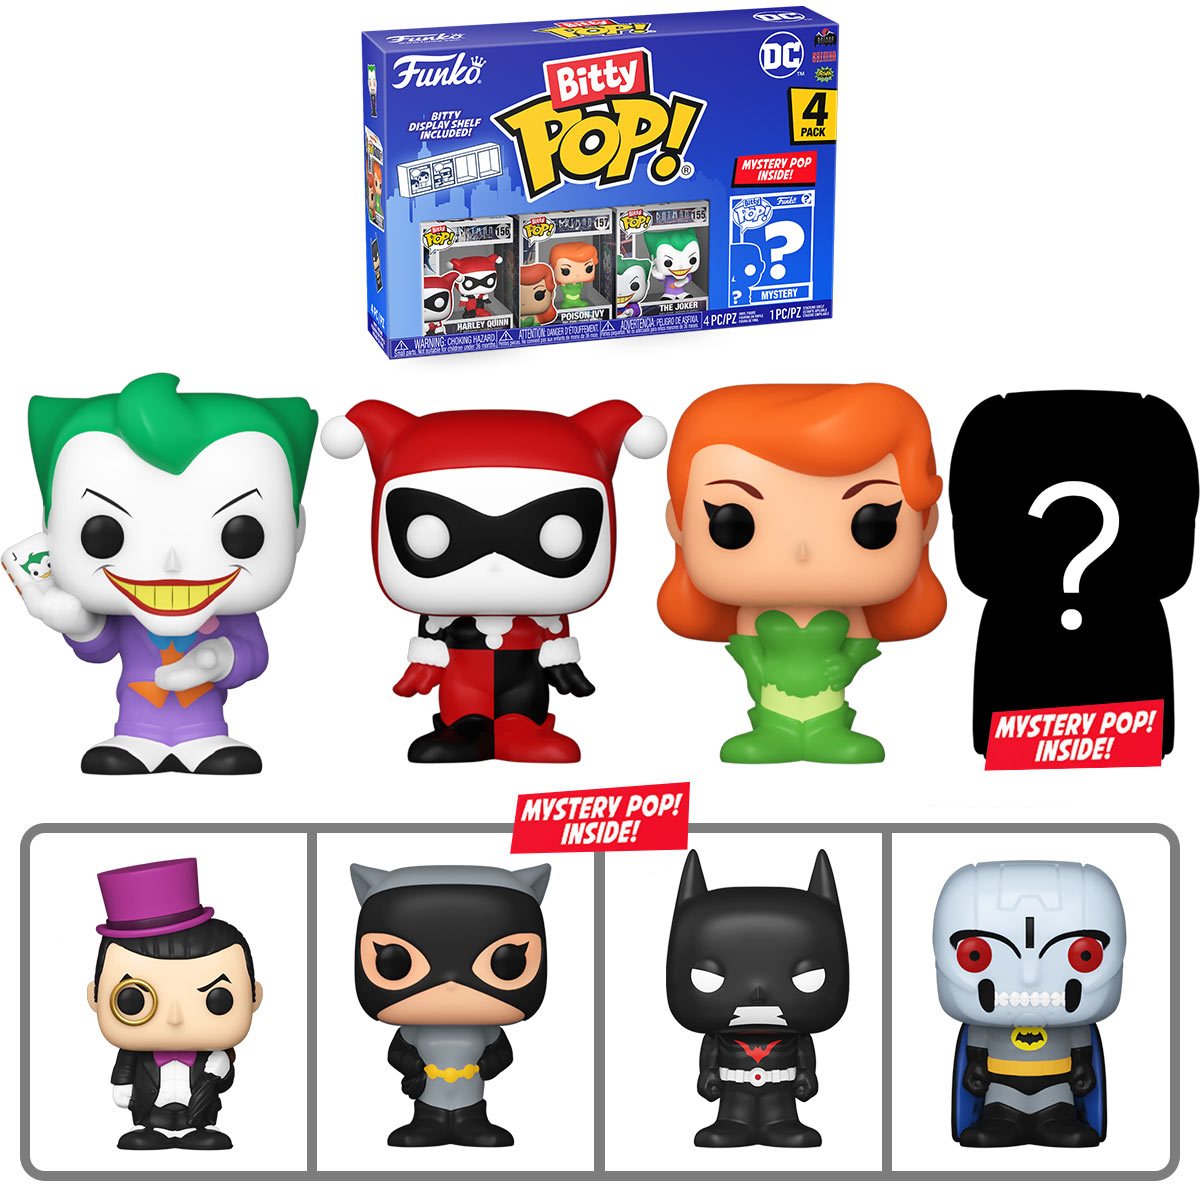 Buy Pop! Harley Quinn & Poison Ivy 2-Pack at Funko.